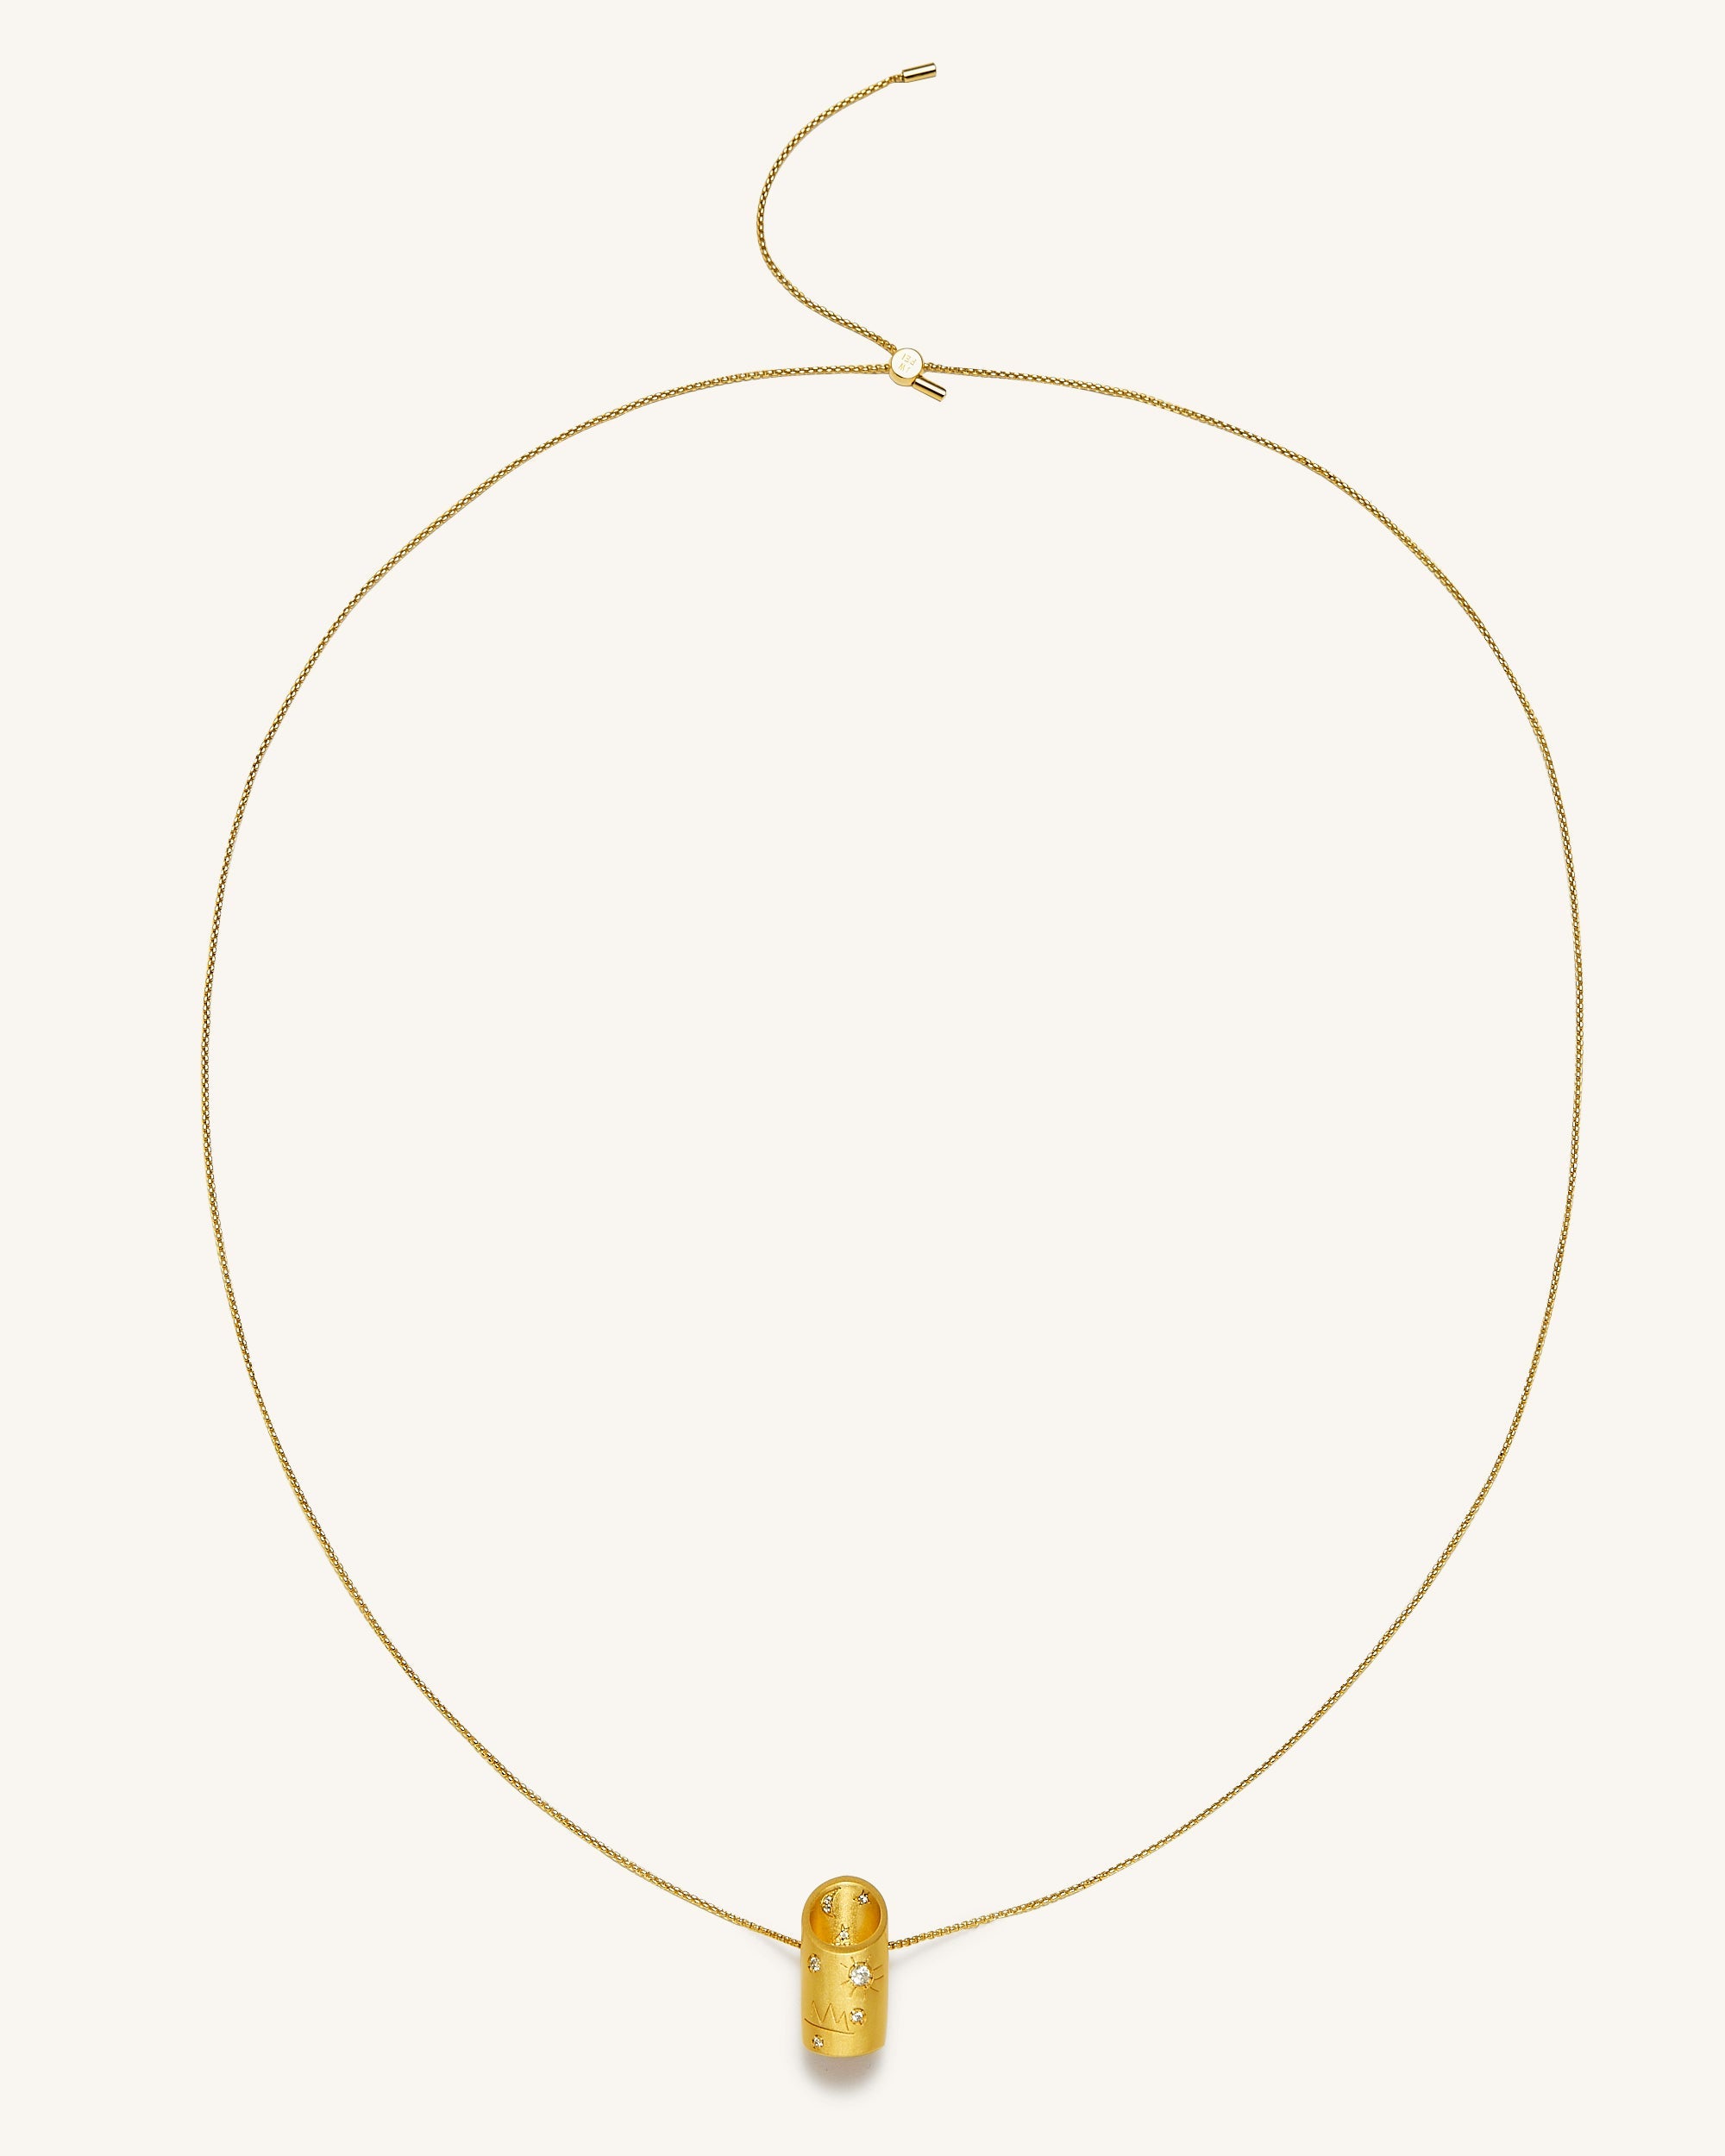 Bamboo Necklace - 18ct Gold Plated & White Zircon